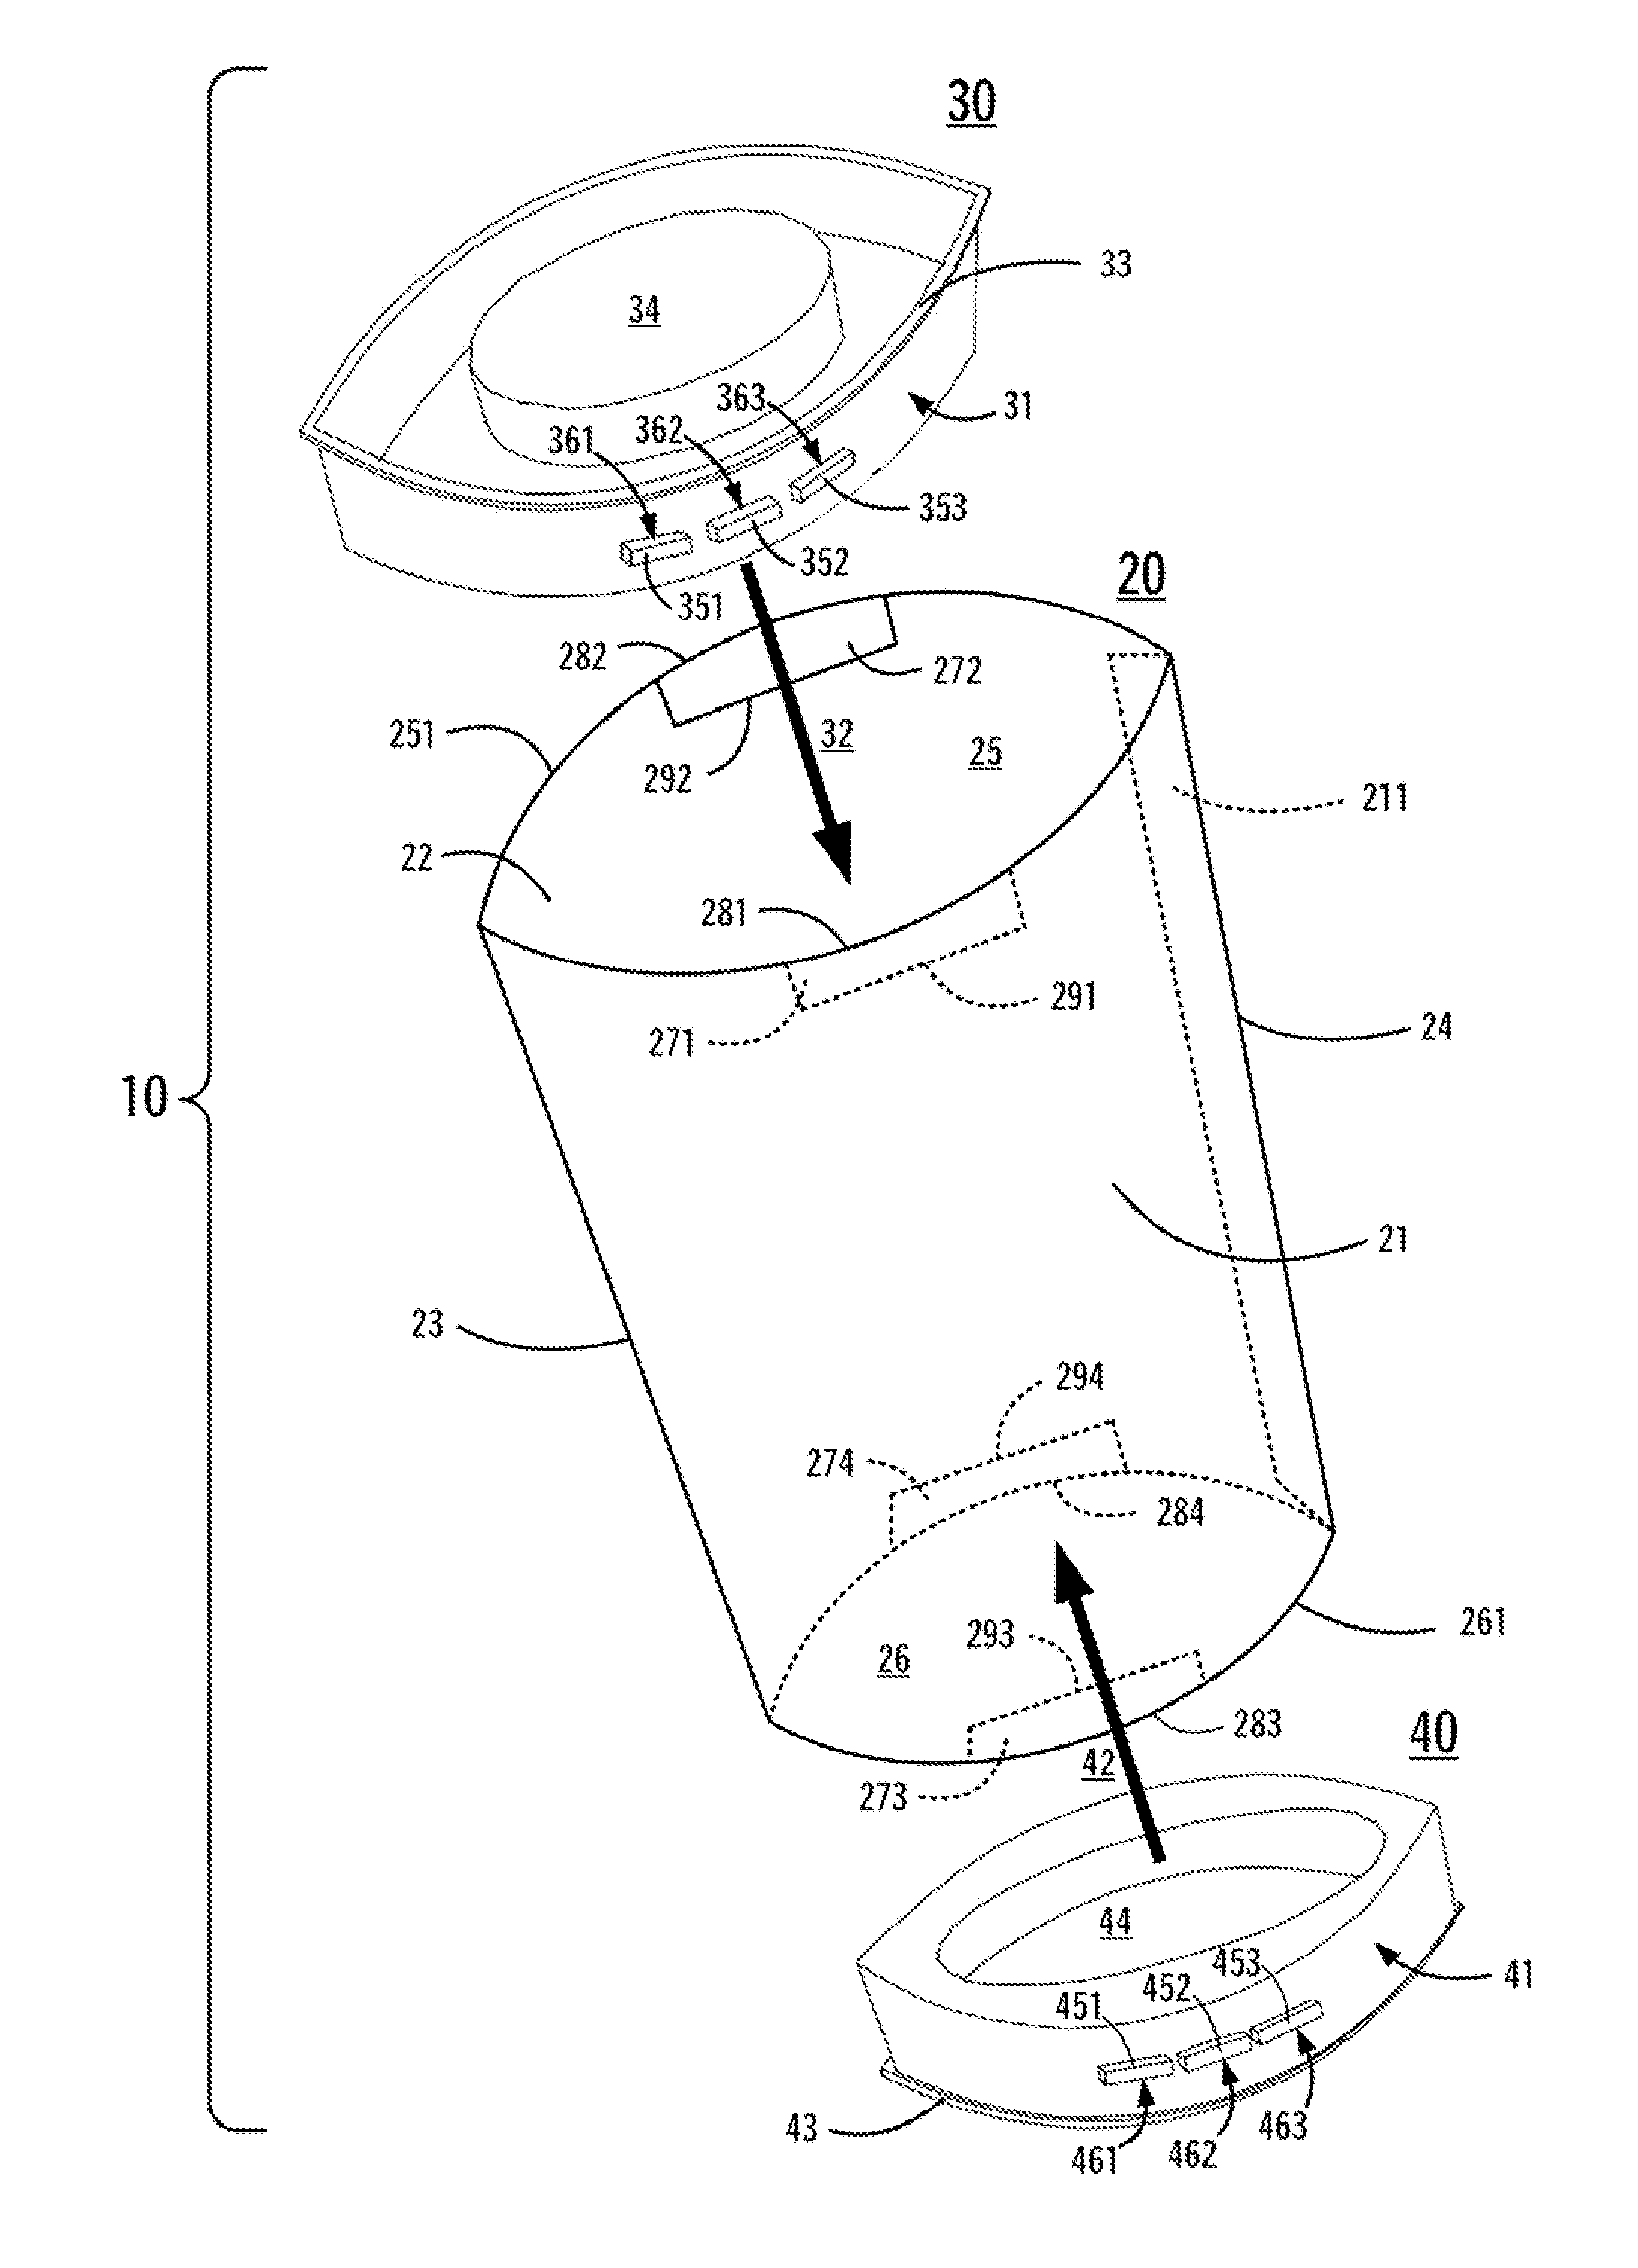 Locking arrangement for sleeve-and-endcap package